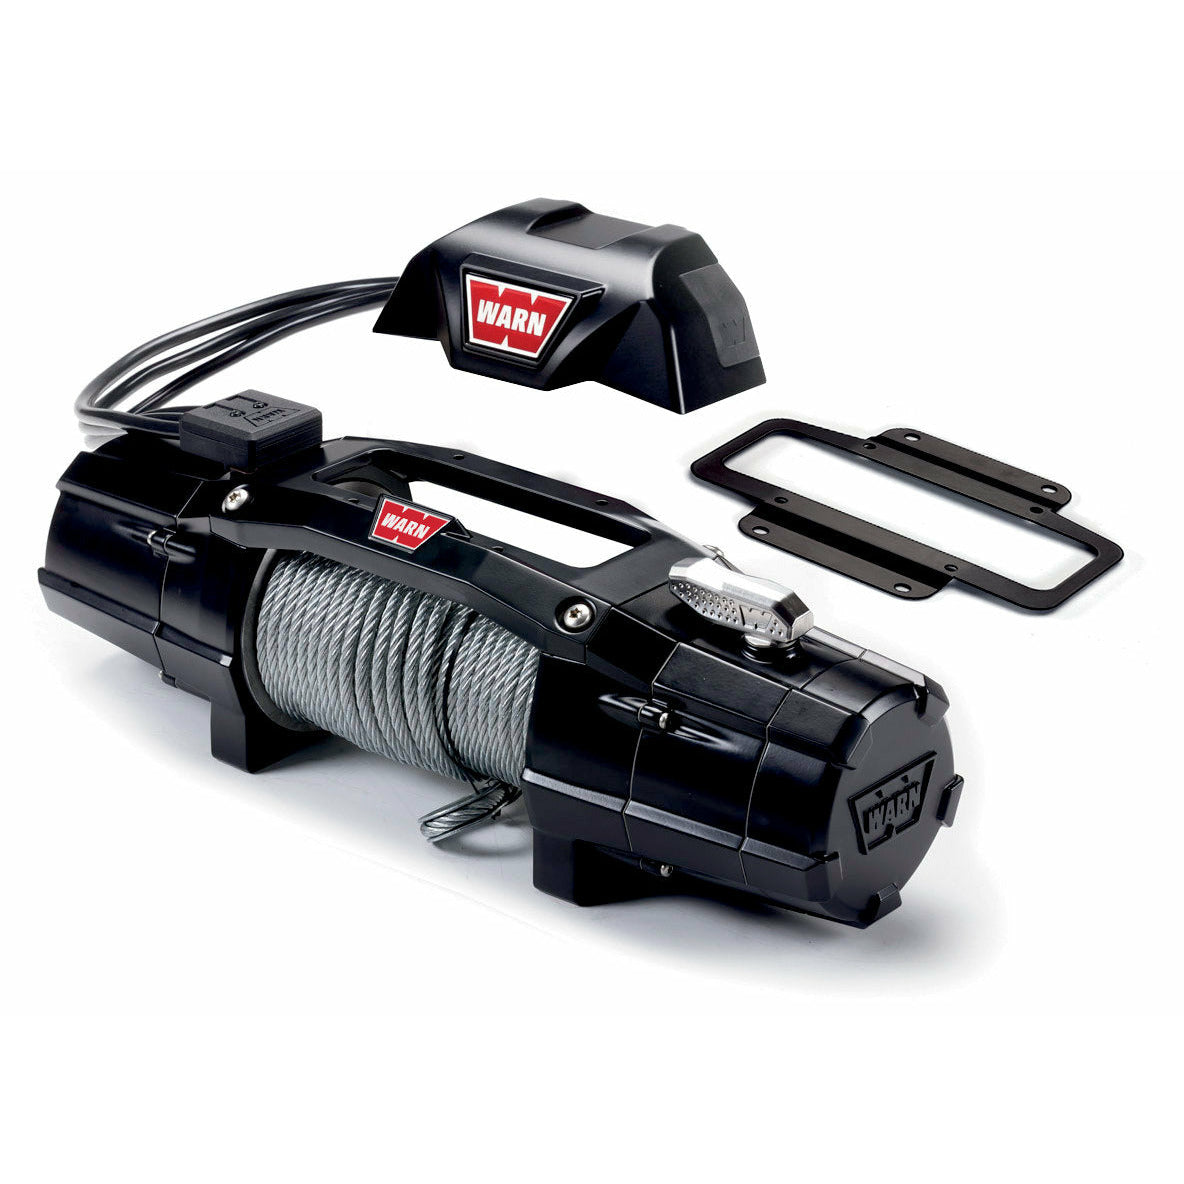 WARN ZEON 10-S Winch with 100' Spydura Synthetic Rope and Hawse Fairlead